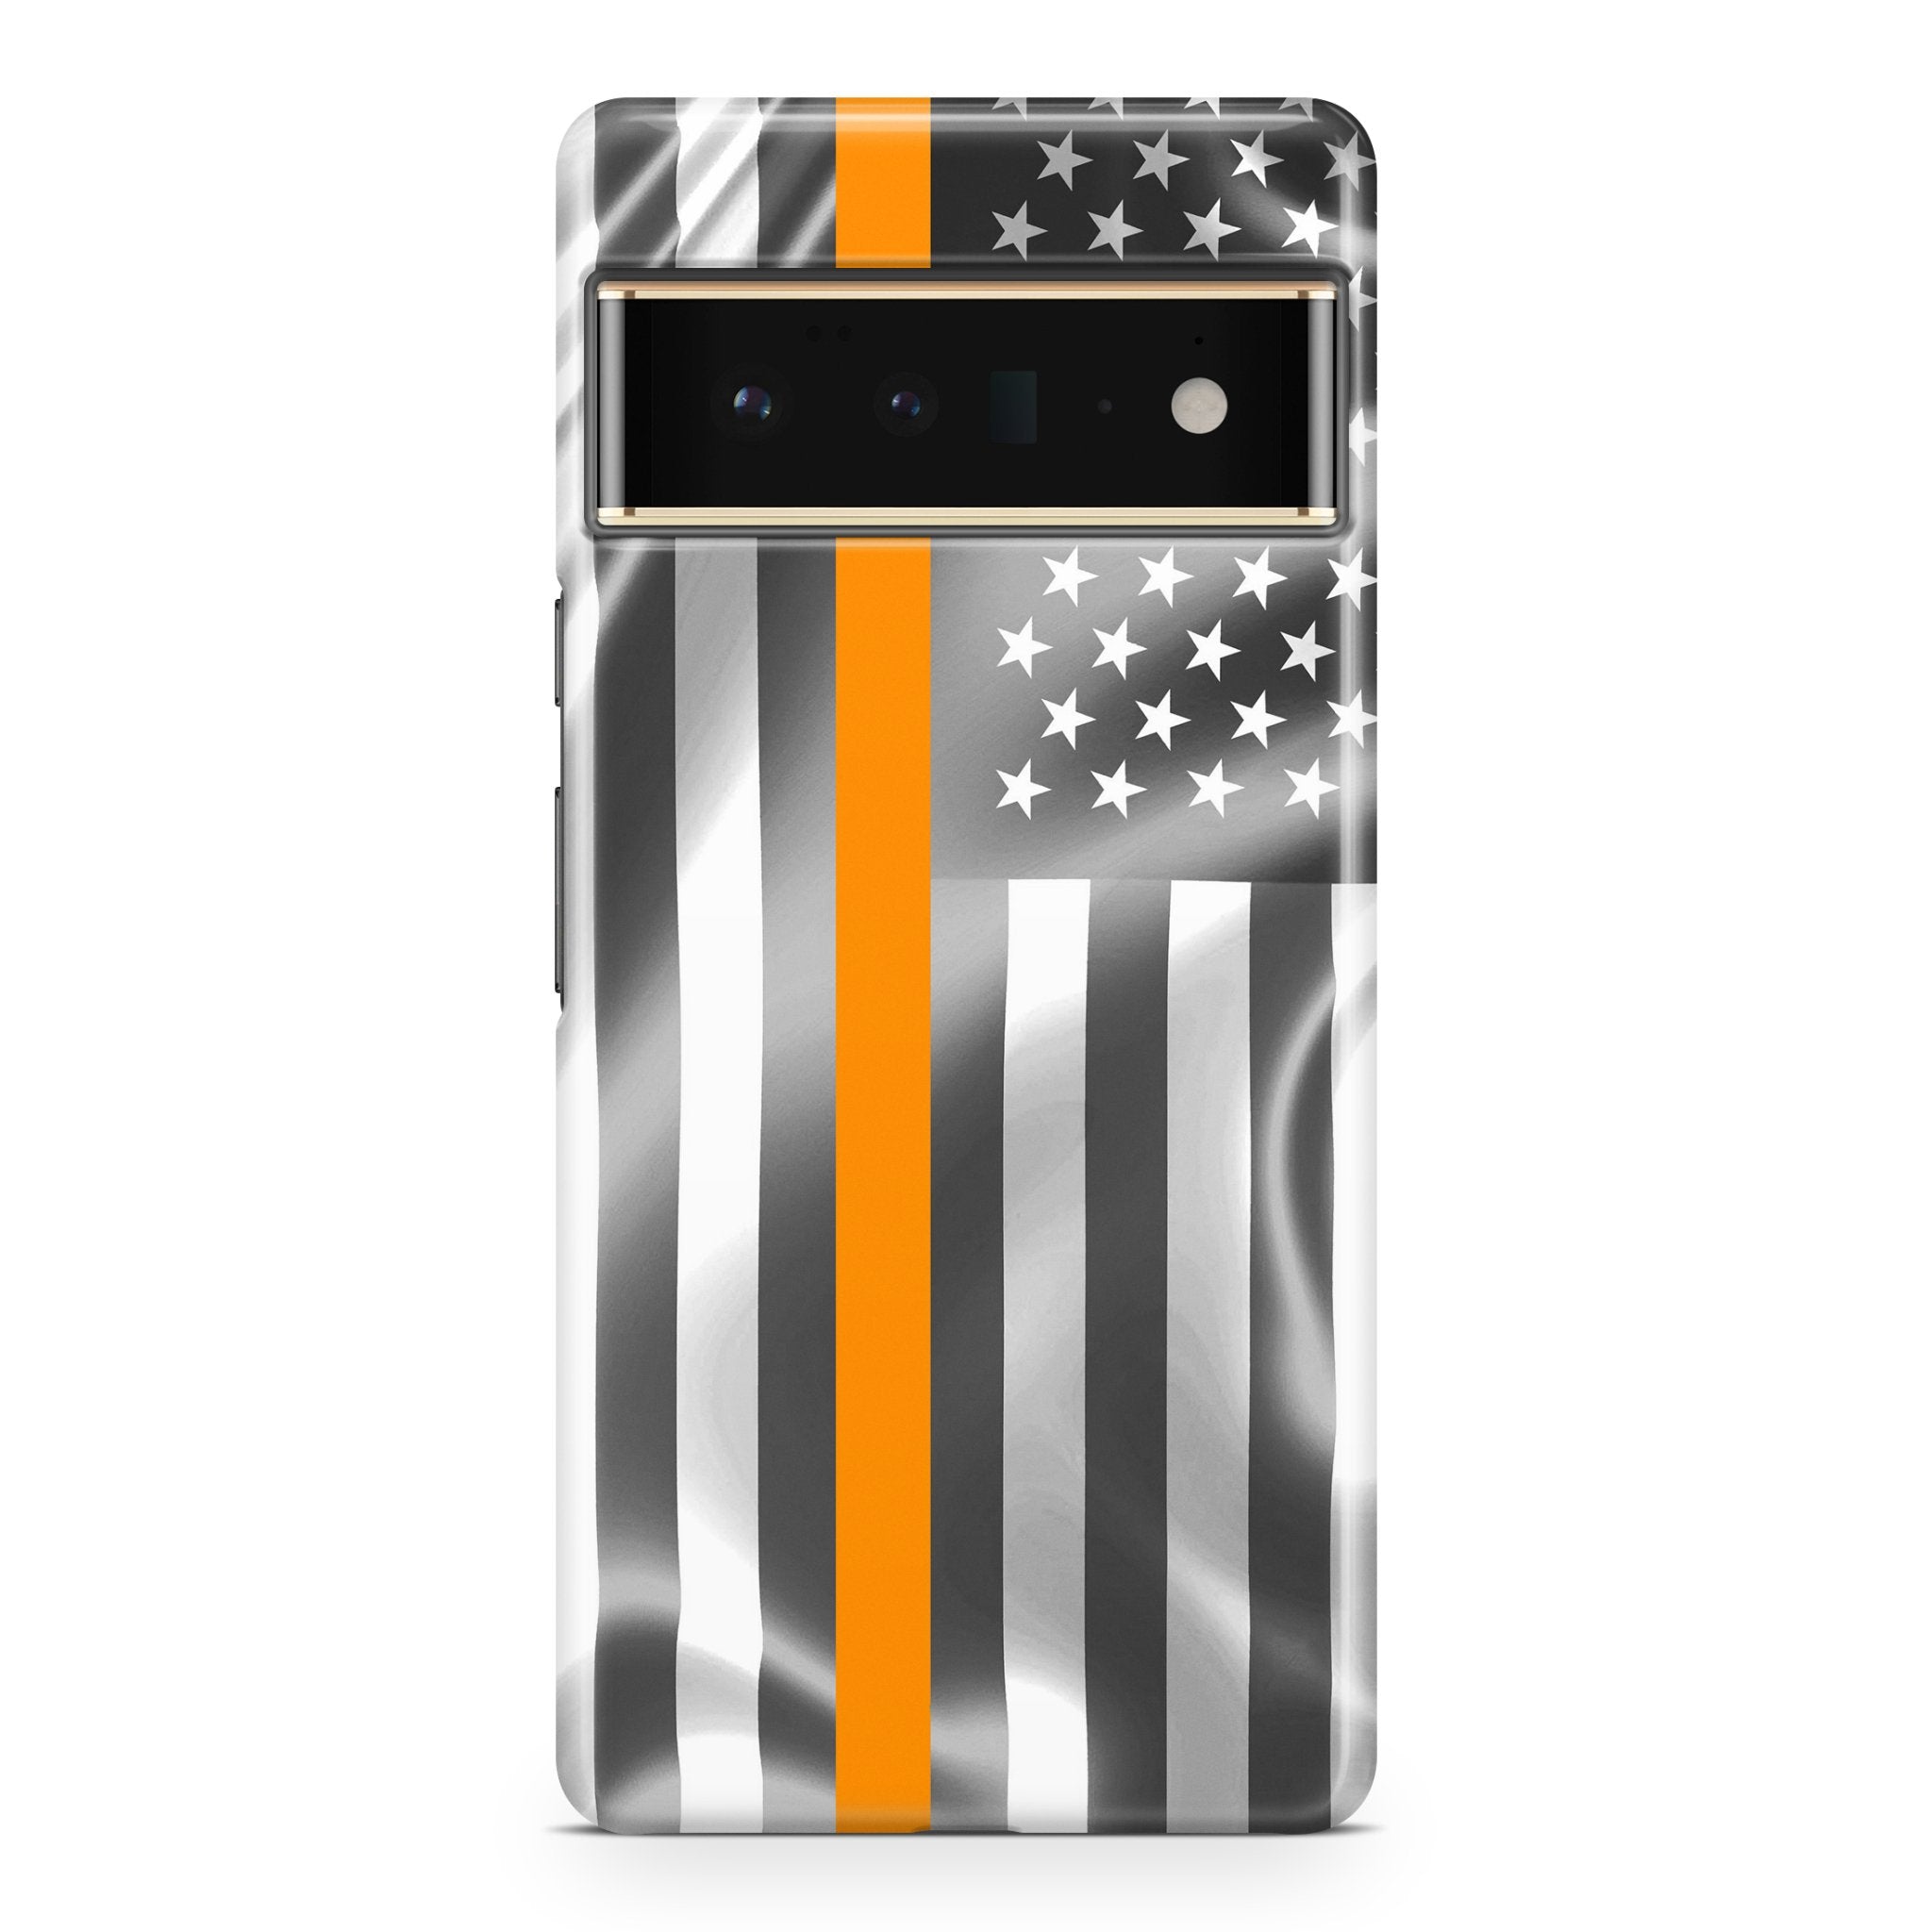 Thin Orange Line - Google phone case designs by CaseSwagger